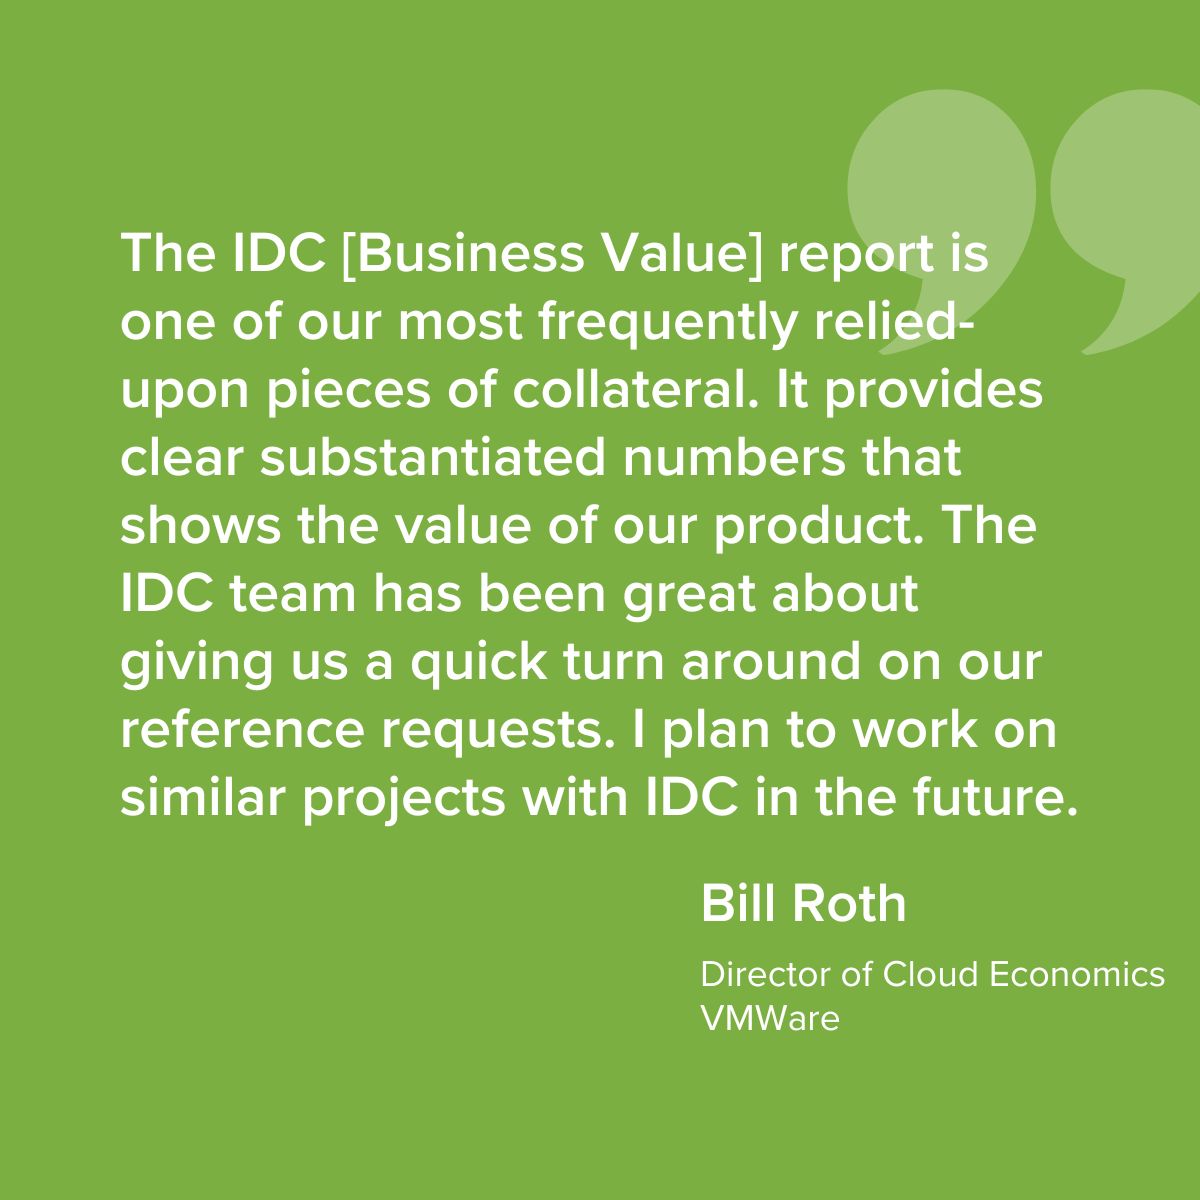 Quote from Bill Roth on IDC Business Value whitepaper